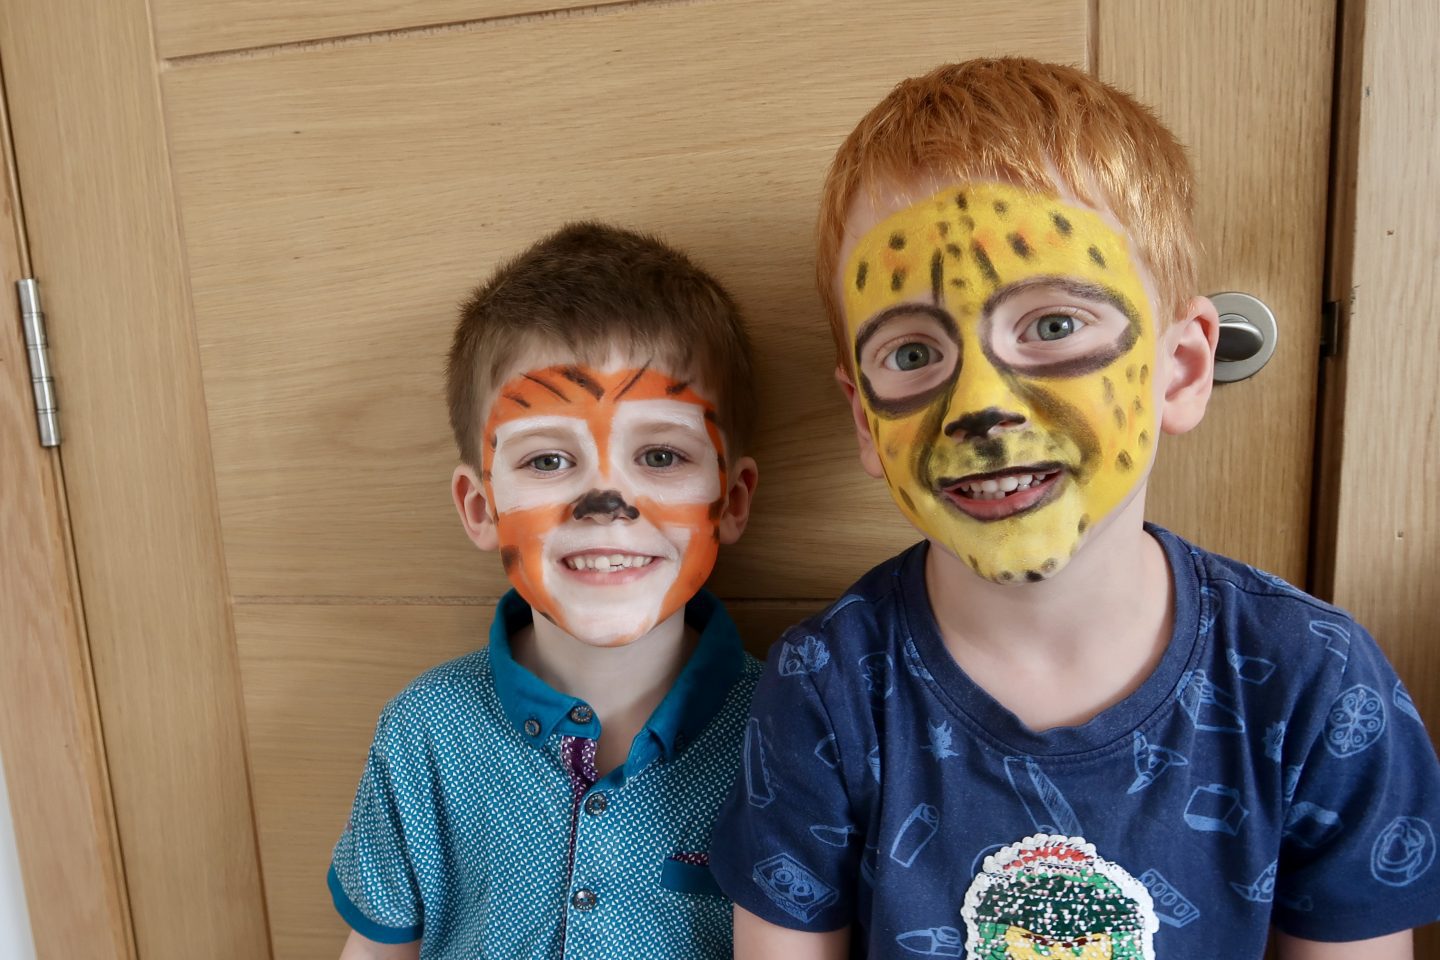 2 boys with their faces painted, one as a tiger and one as a cheetah